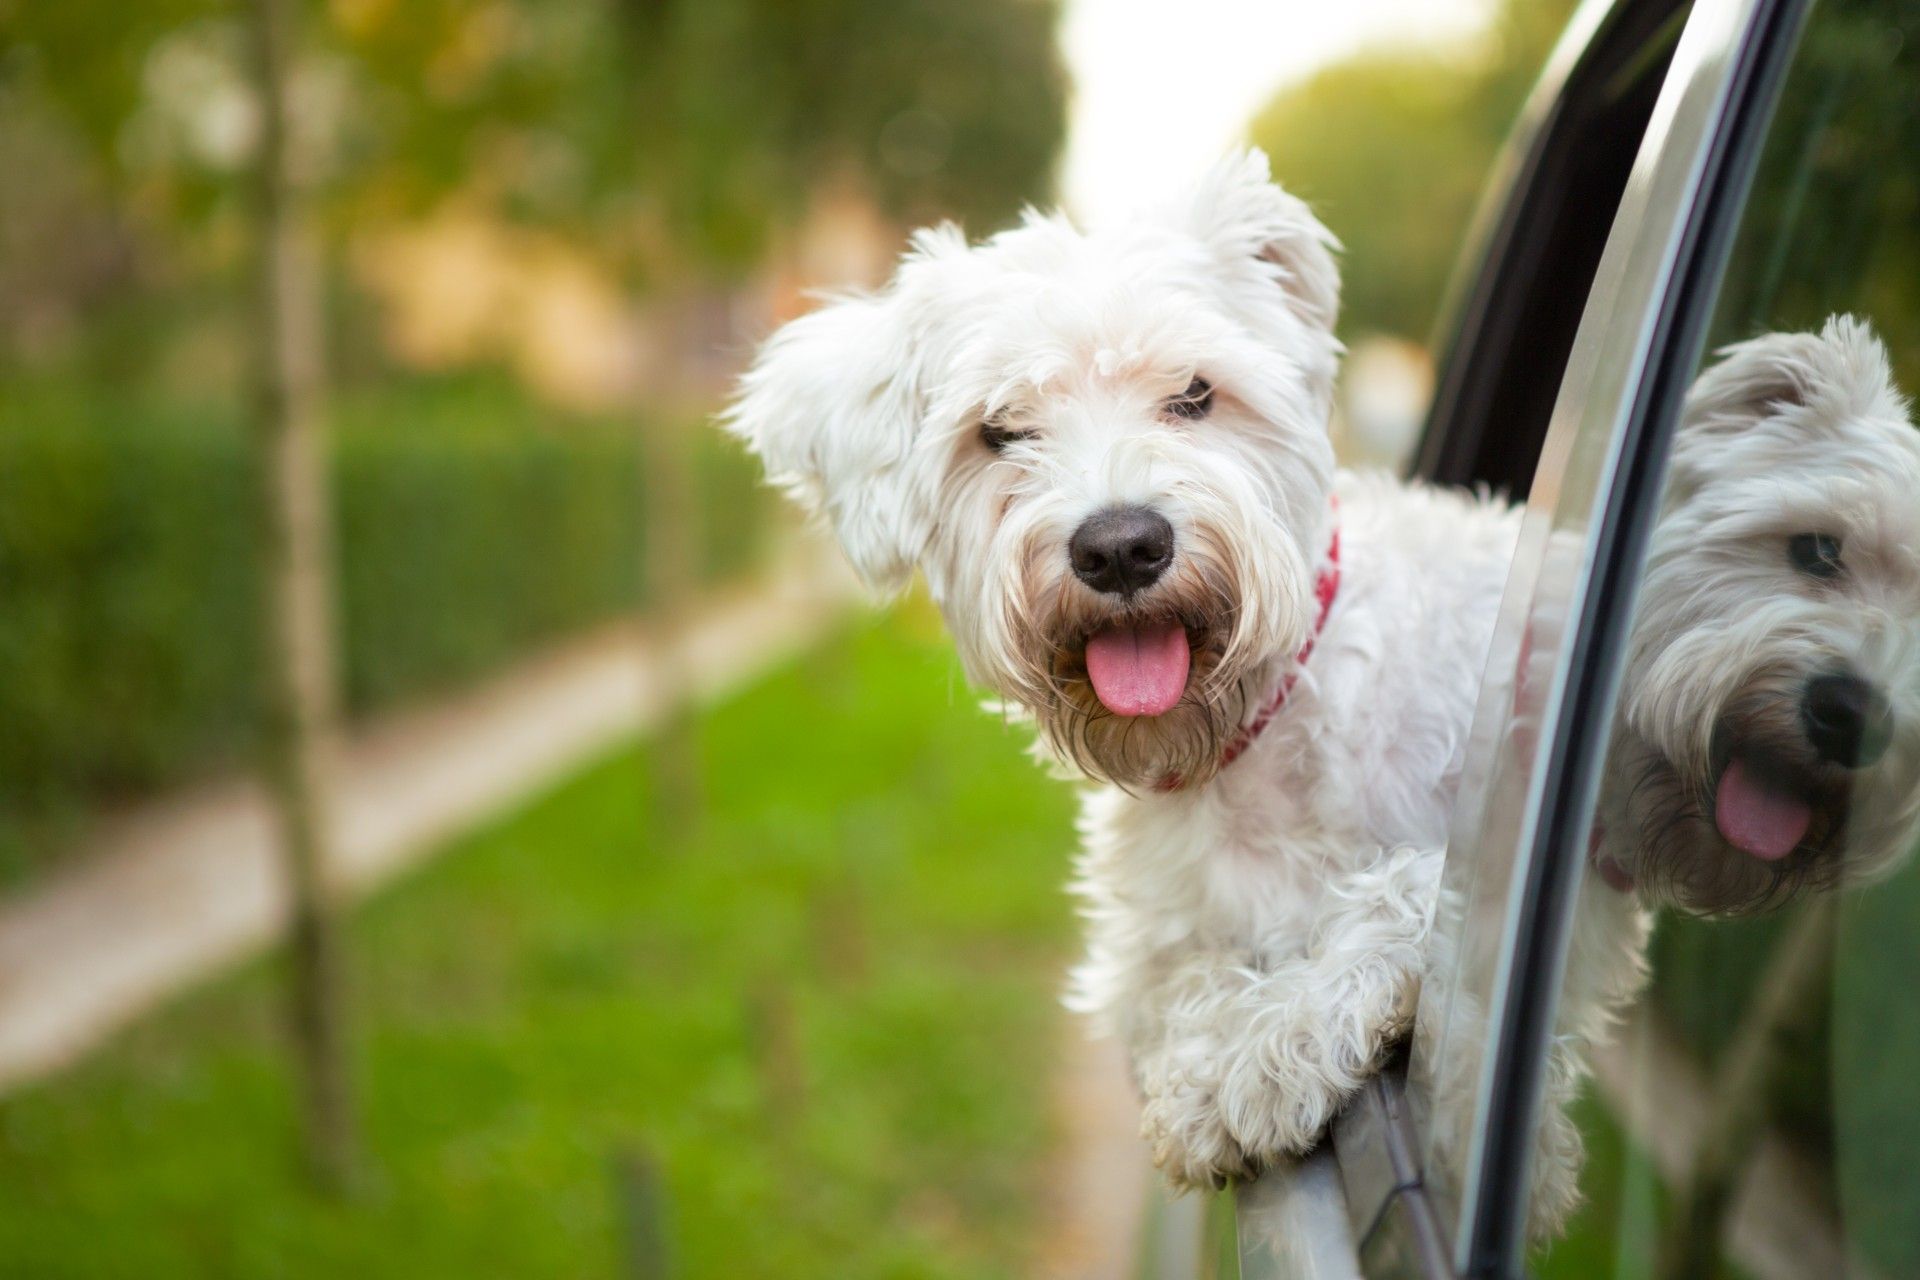 White dog hangs out the rear side window of a car - unrestrained pets